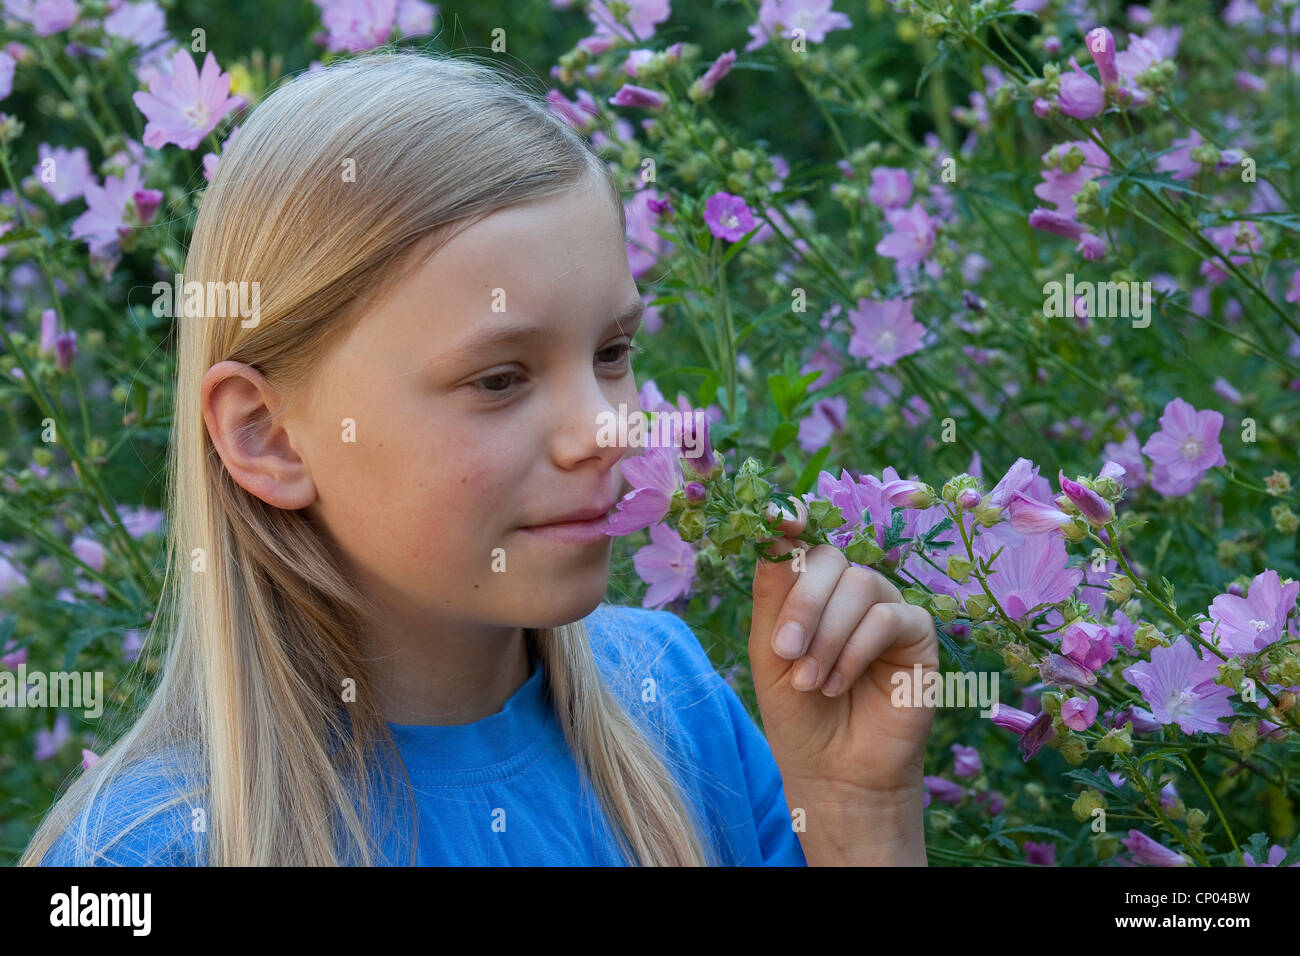 hollyhock mallow, large-flowered mallow, pink mallow, vervian cheeseweed (Malva alcea), girl smelling at mallow blossoms, Germany Stock Photo